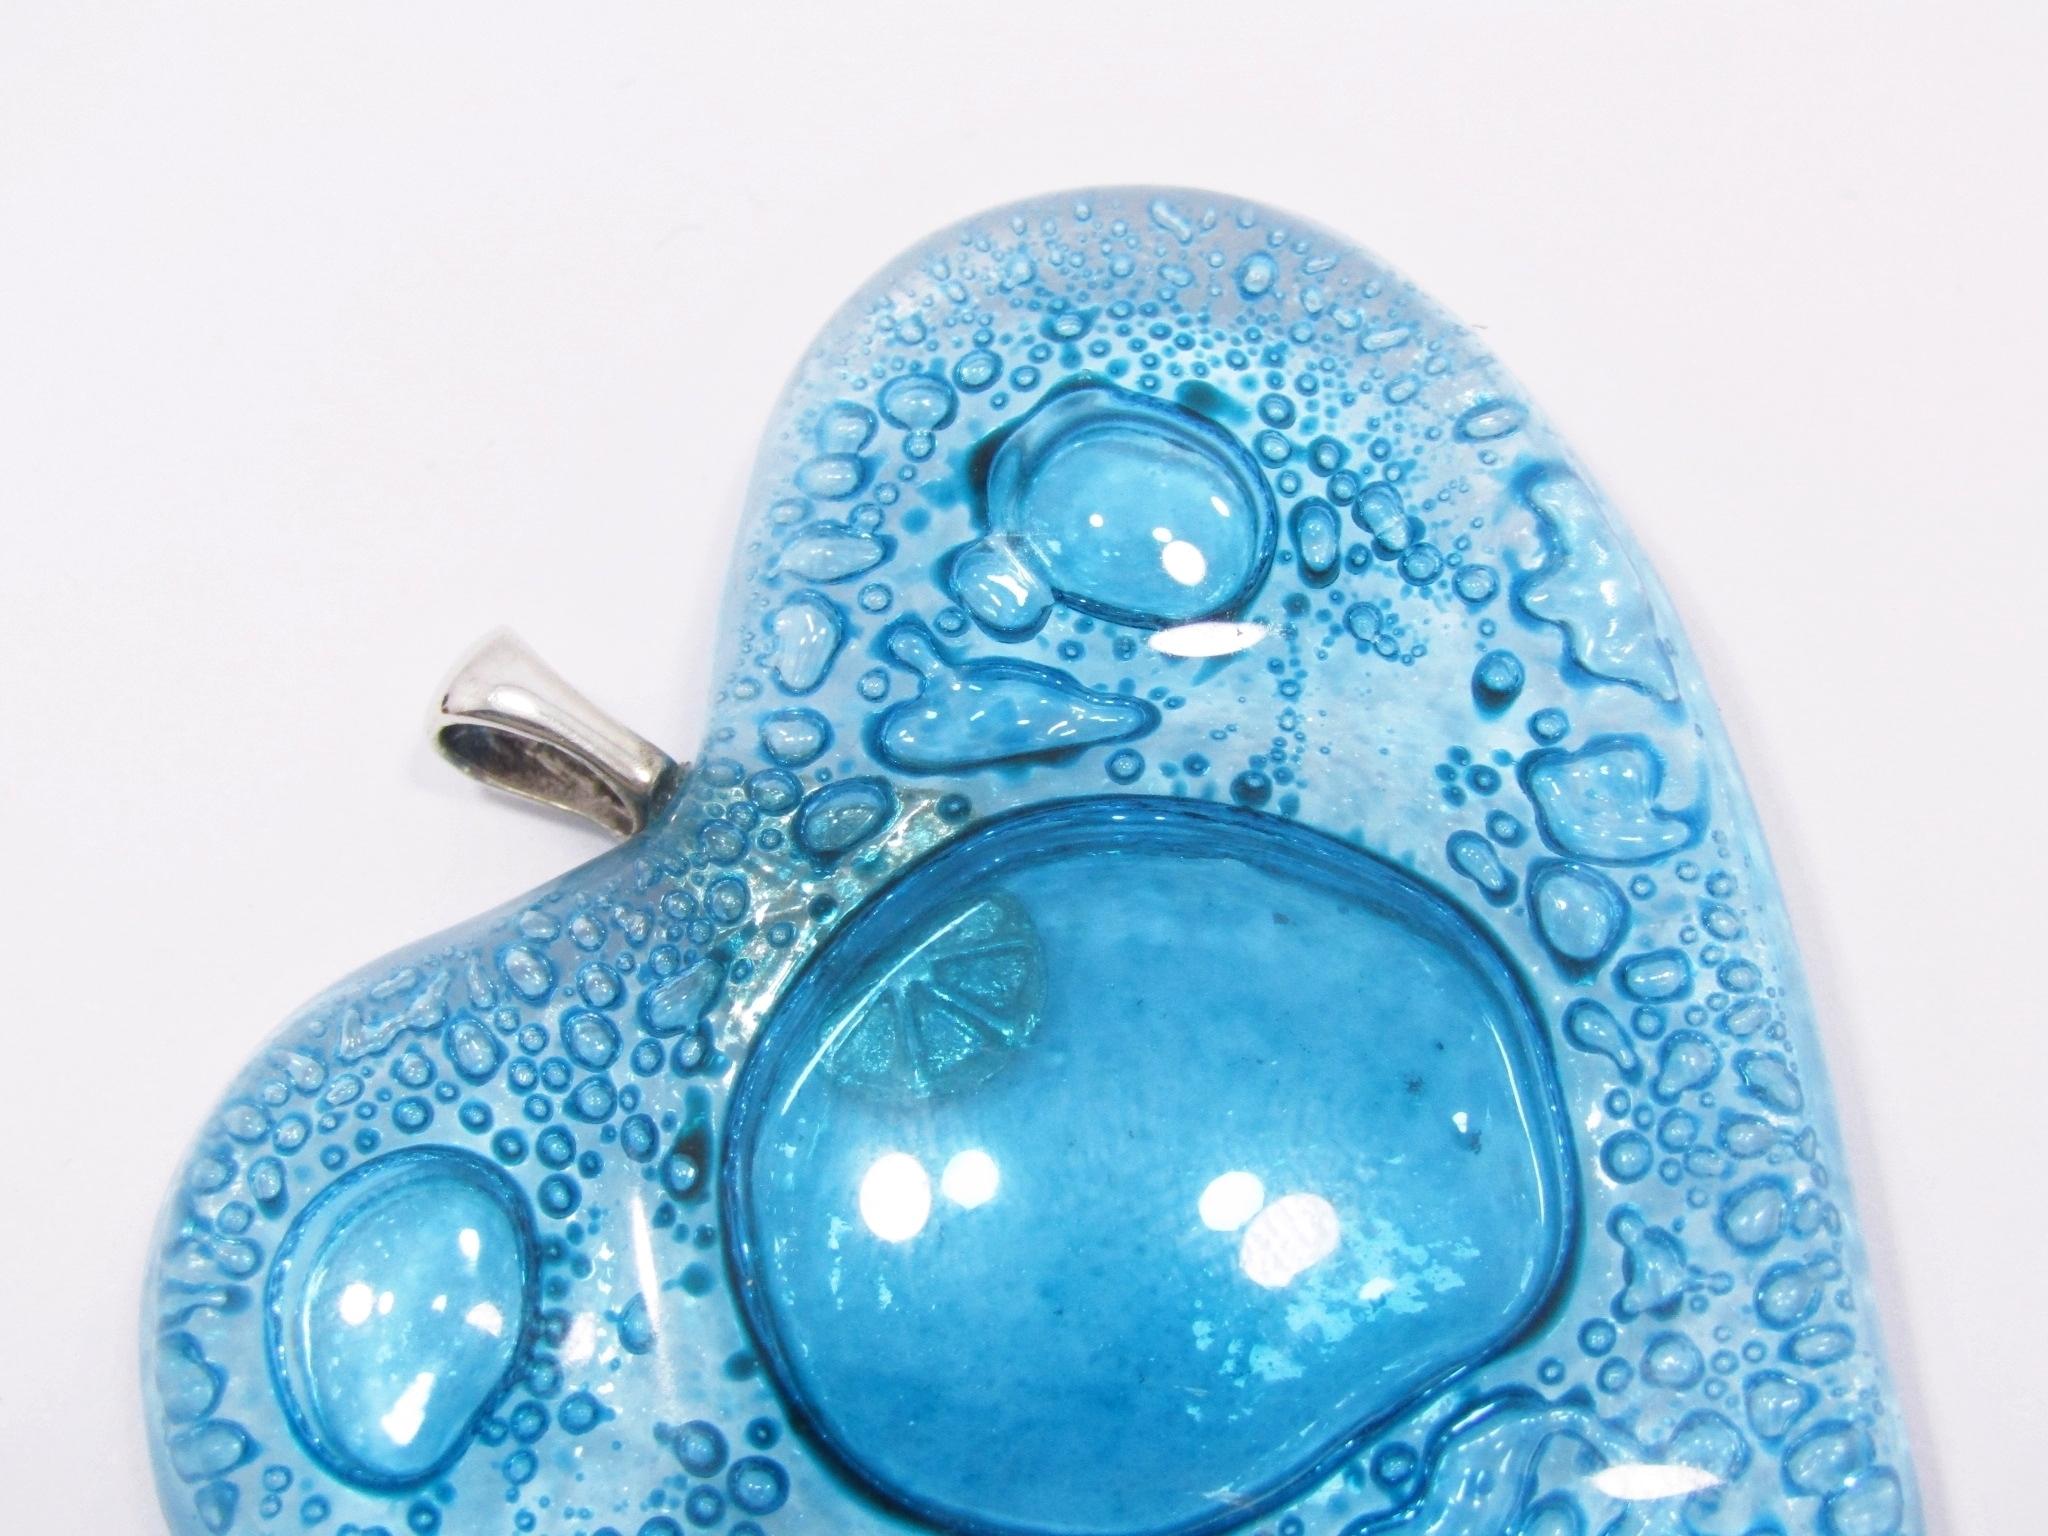 A Magnificent Huge Sea Blue Glass Heart Pendant With a Sterling Silver Bail